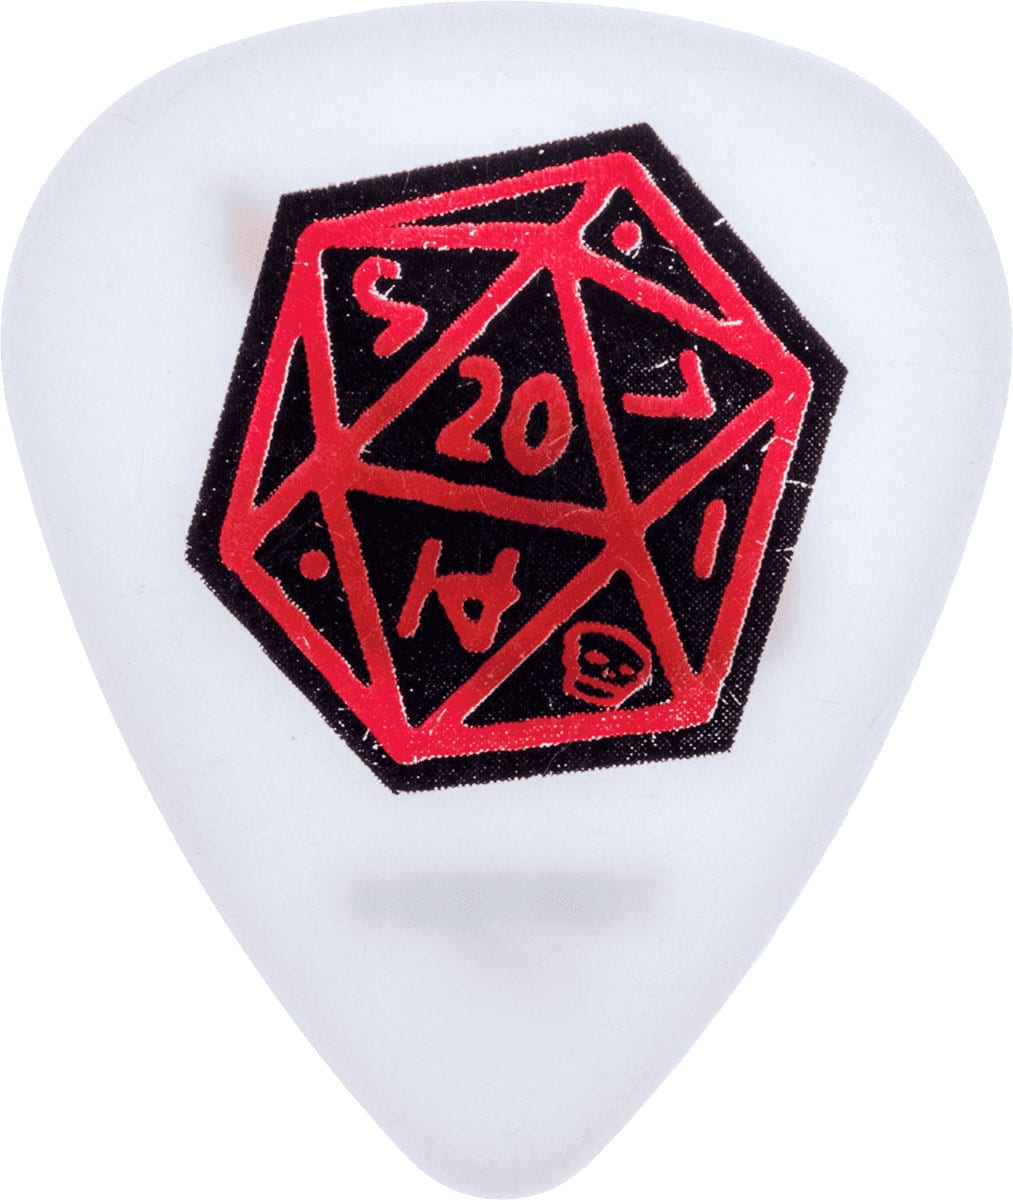 JIM DUNLOP DIRTY DONNY II 36 PACK ICOSAHEDRON WHITE 0.73 MM